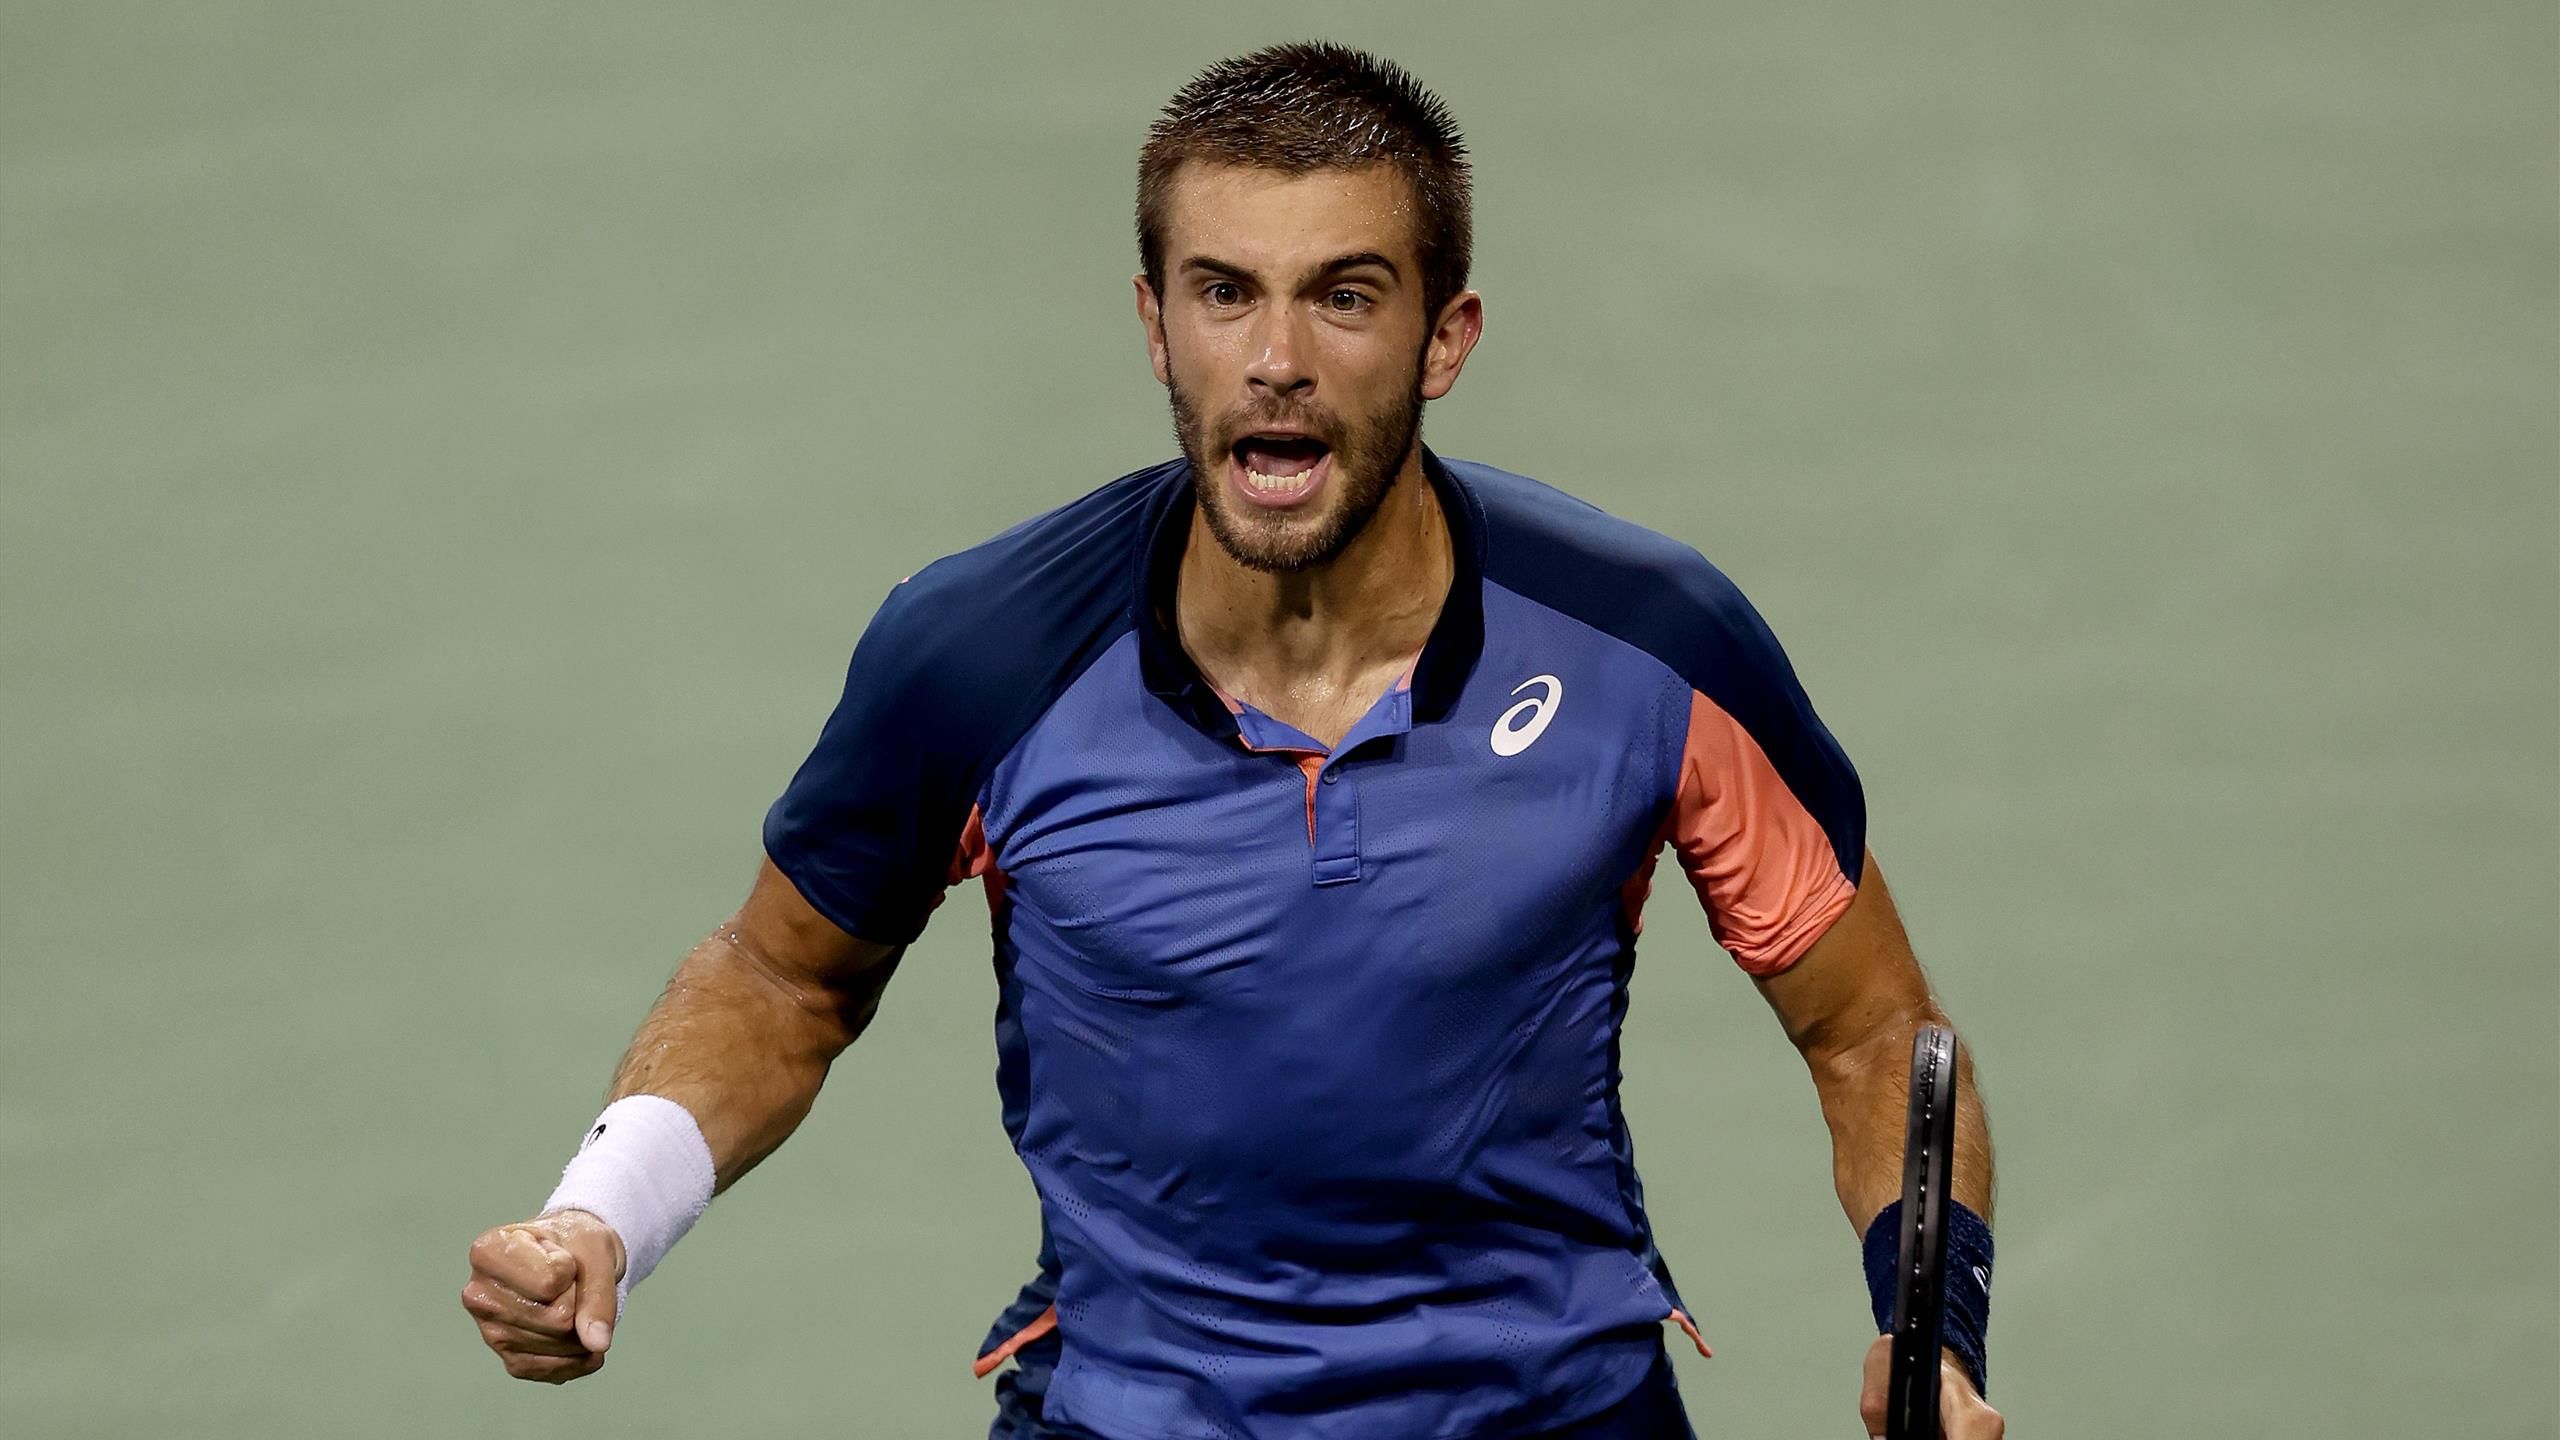 I dont have much to lose - Borna Coric beats Cameron Norrie, ready to face Stefanos Tsitsipas in ATP Cincinnati final